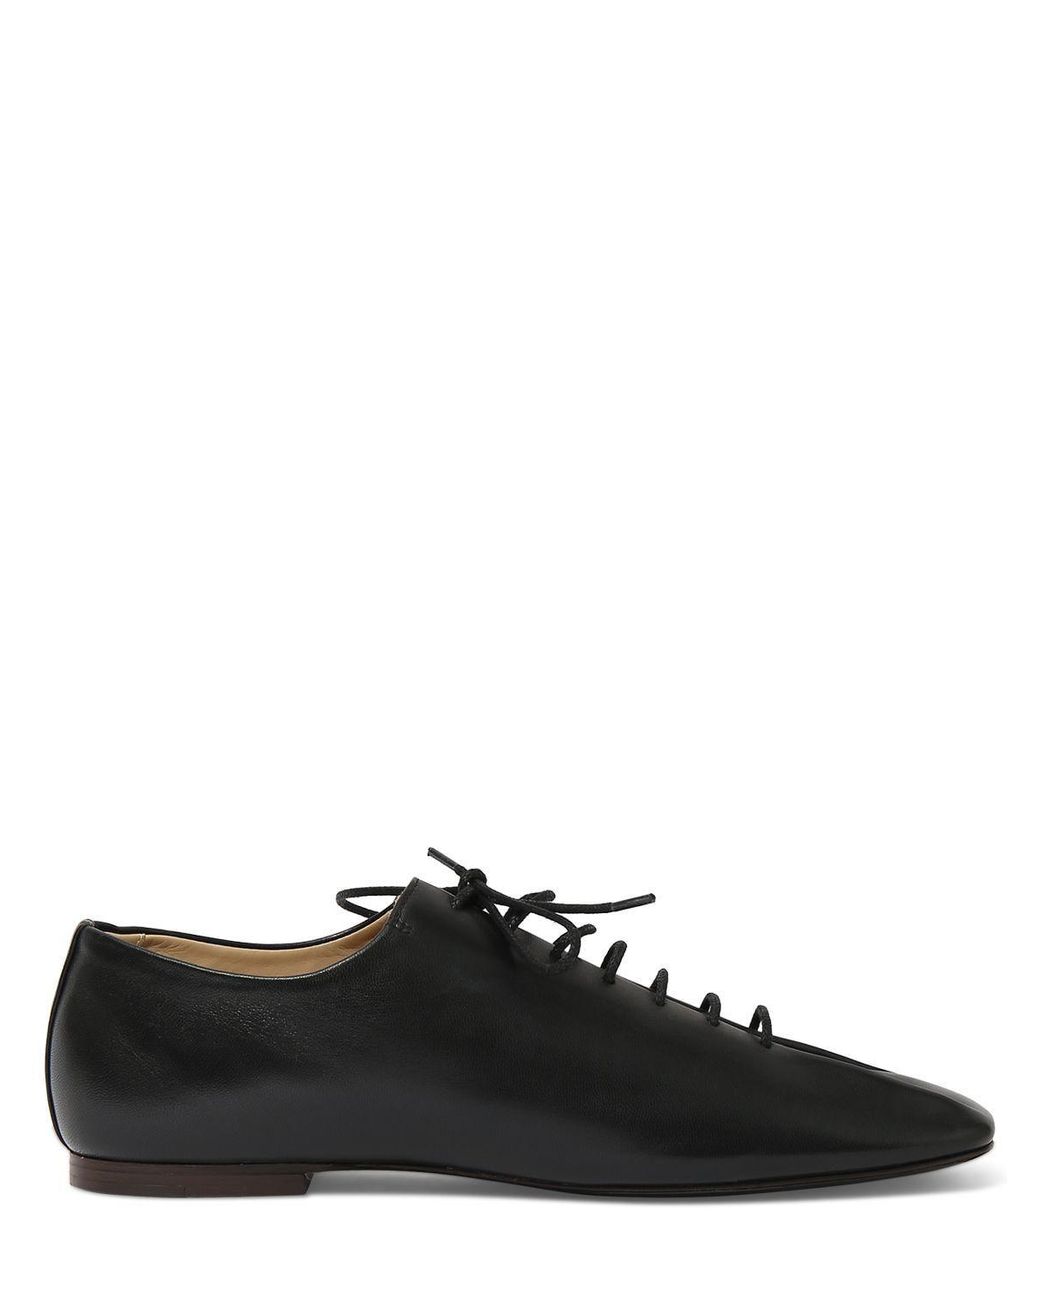 Lemaire 10mm Souris Leather Lace-up Shoes in Black | Lyst